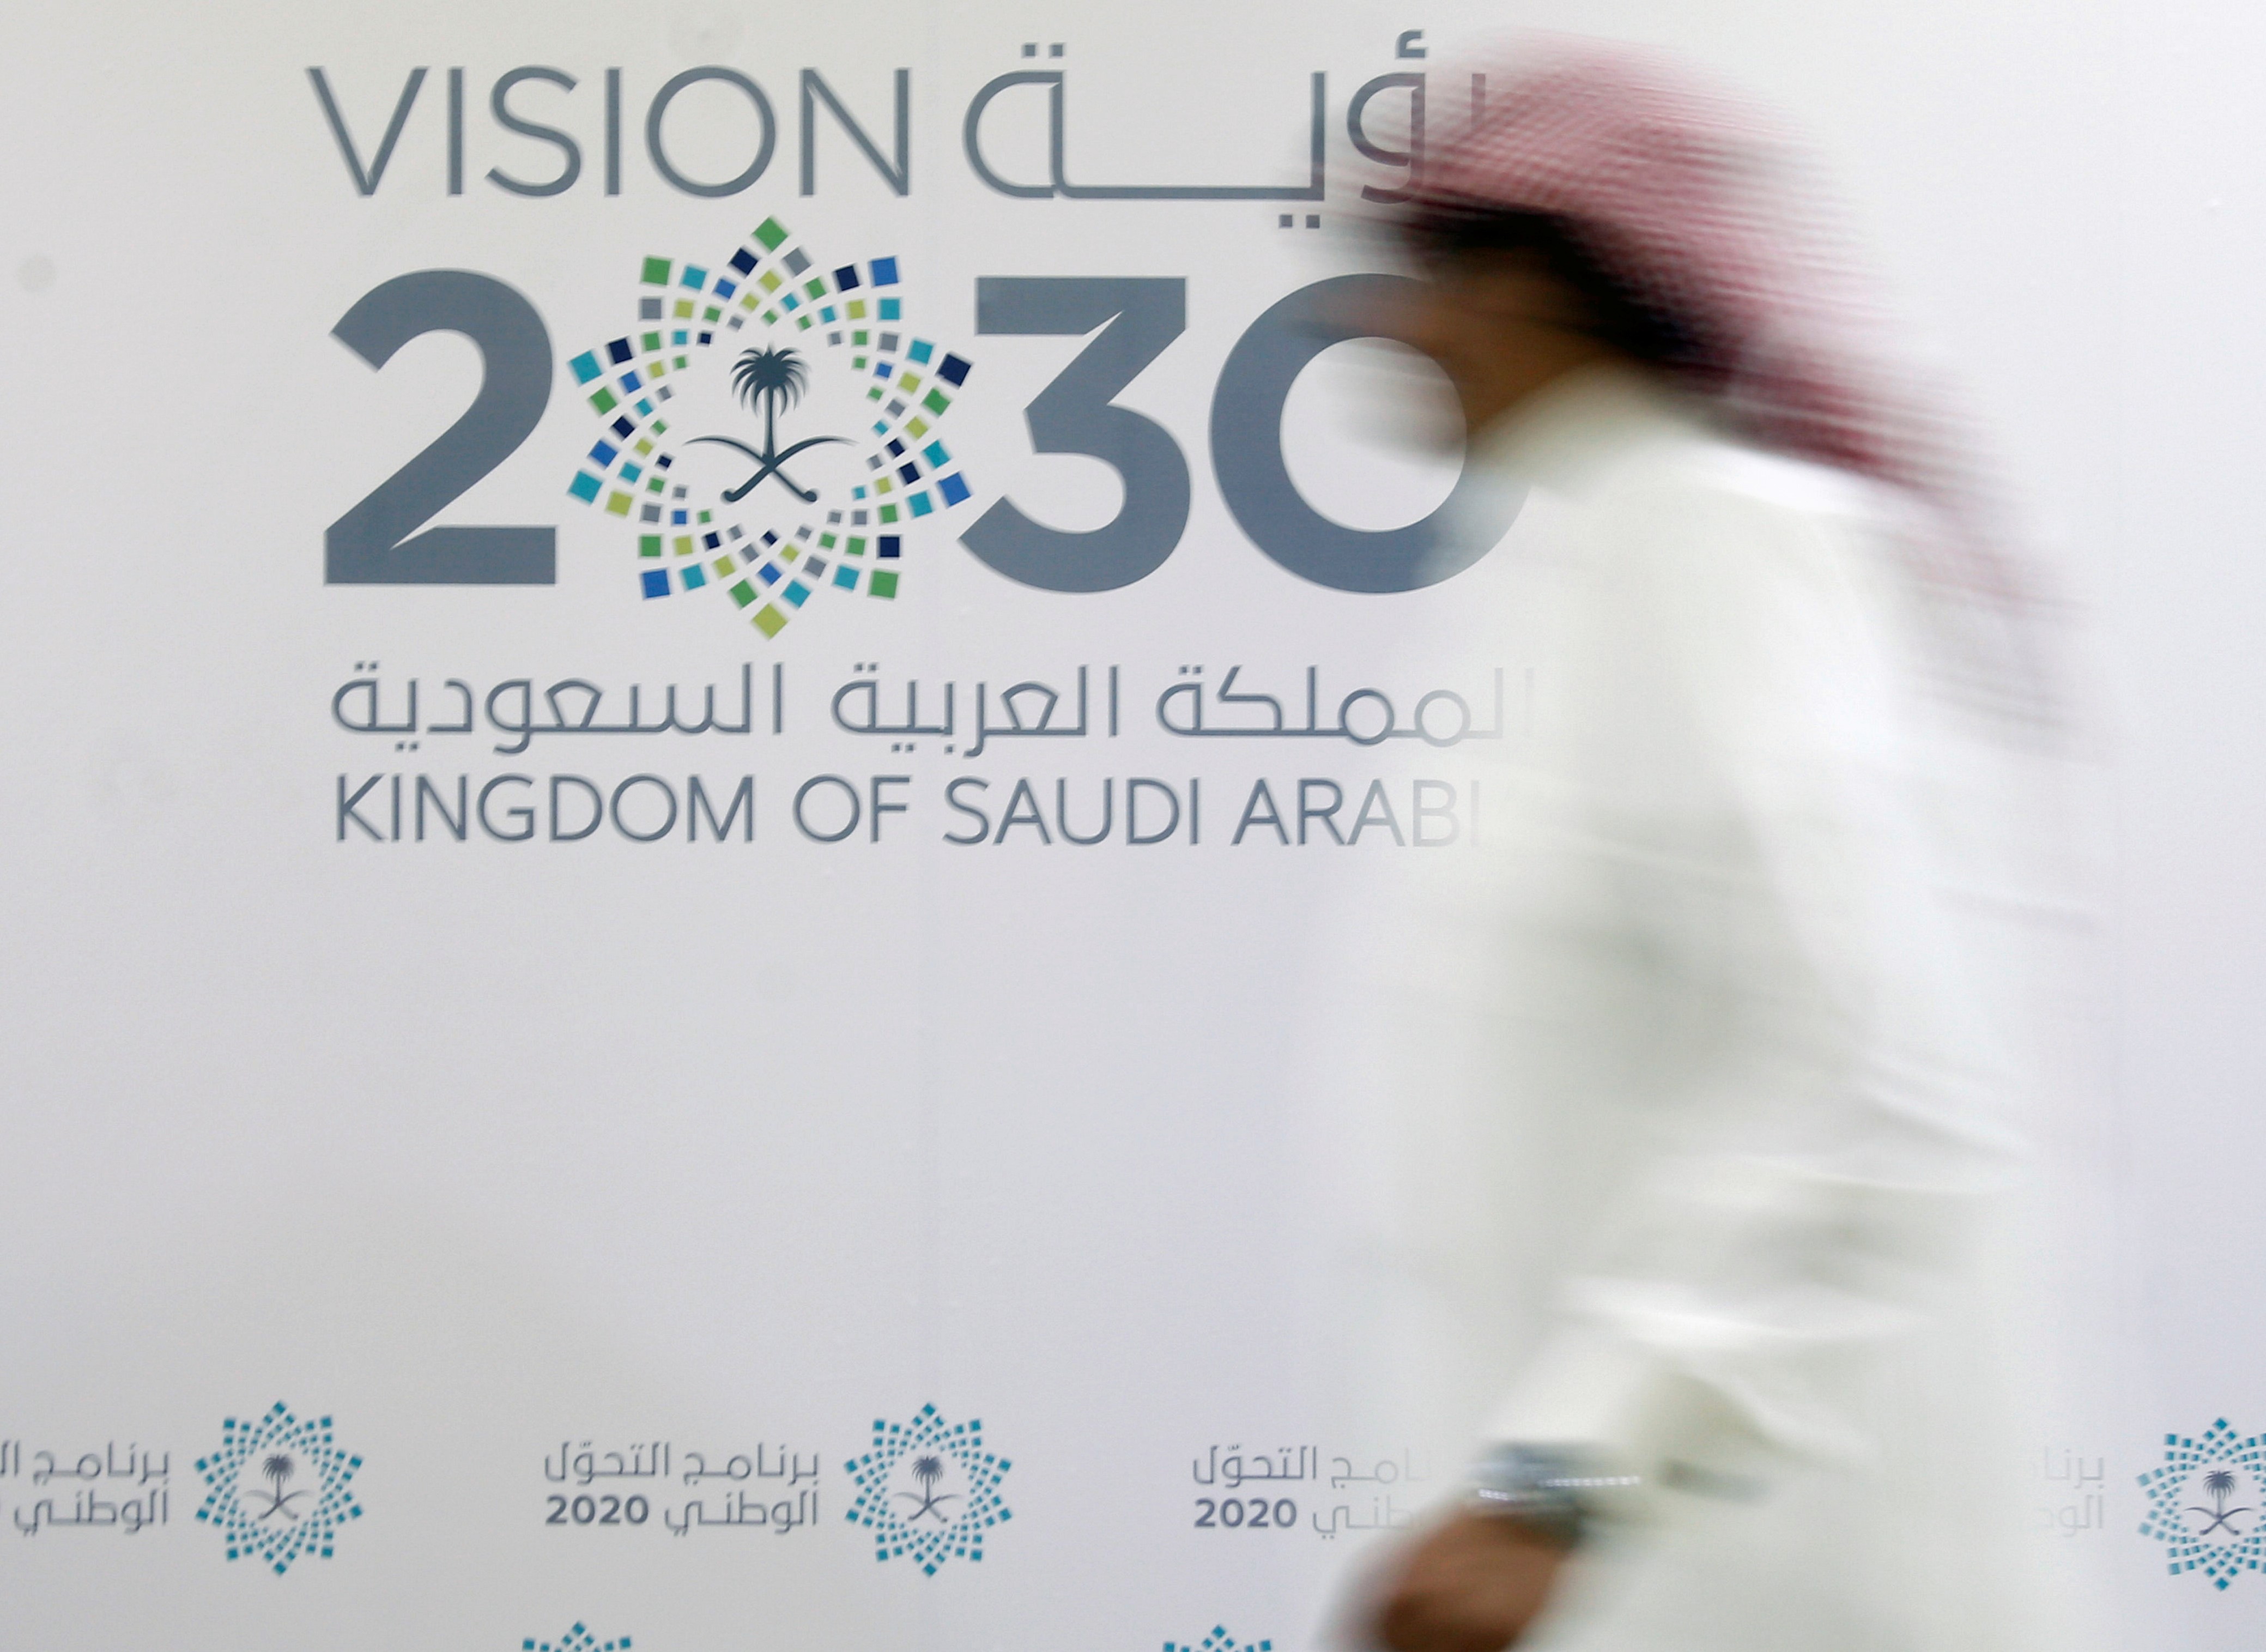  A man walks past the logo of Vision 2030 after a news conference, in Jeddah, Saudi Arabia June 7, 2016.